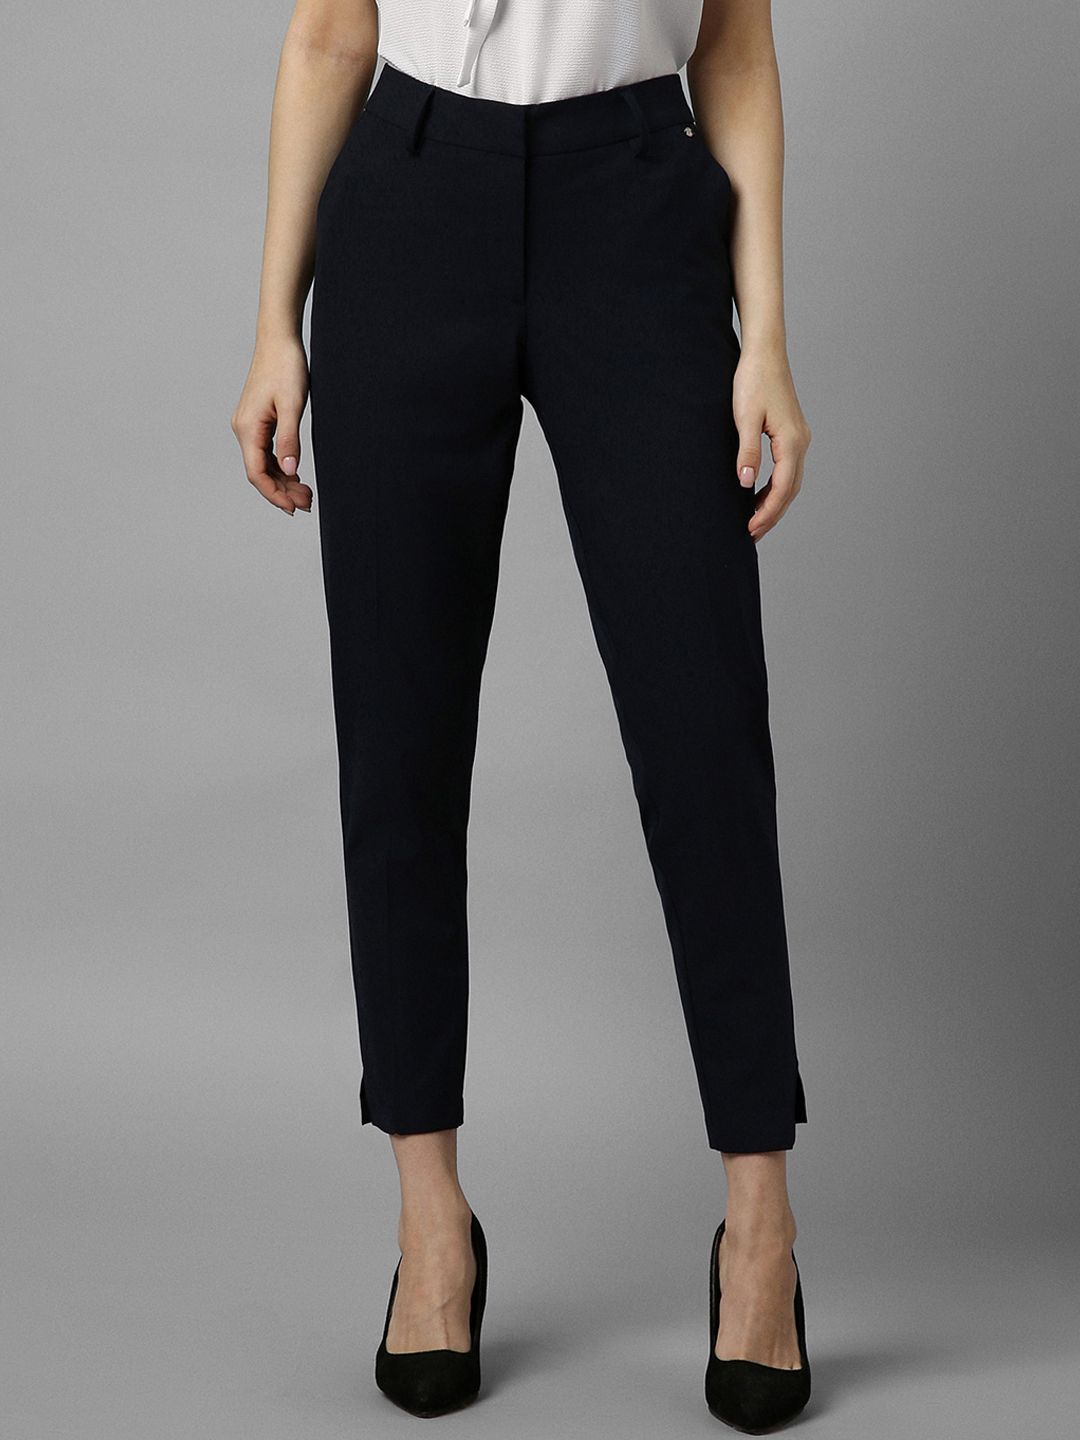 Allen Solly Woman Formal Trousers Price in India